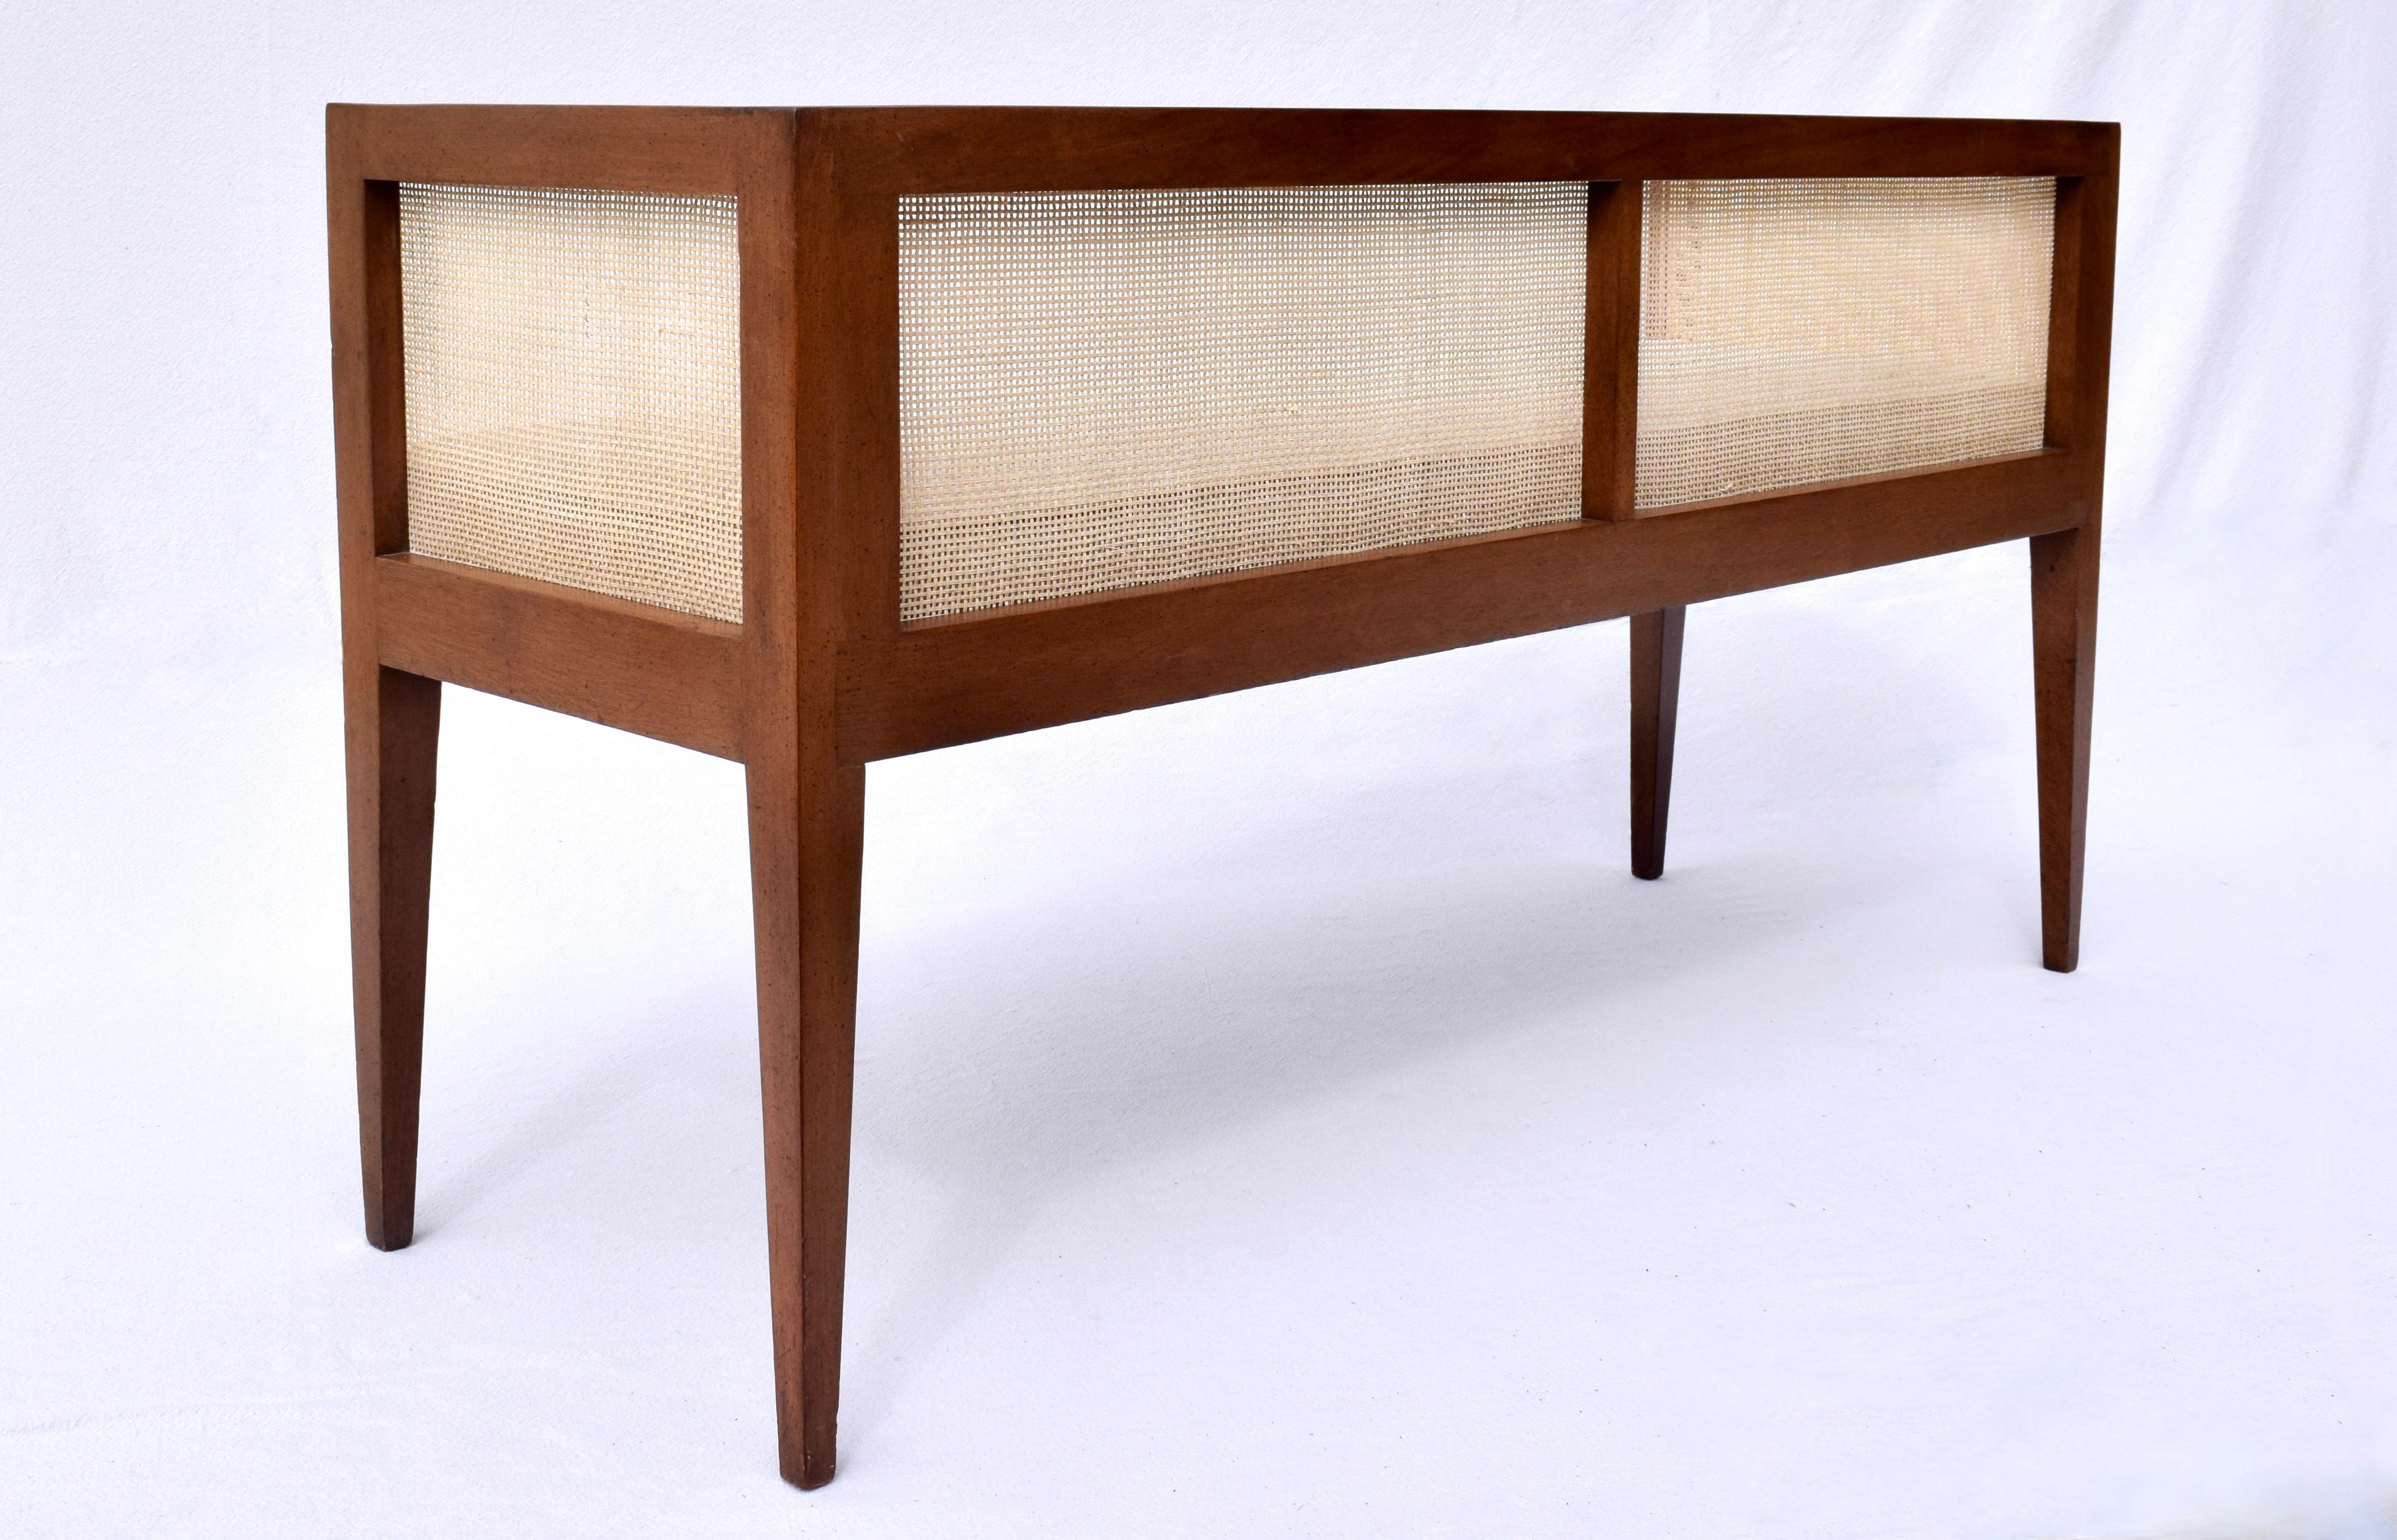 1950s Walnut Window Bench Attributed to Edward Wormley for Dunbar For Sale 2